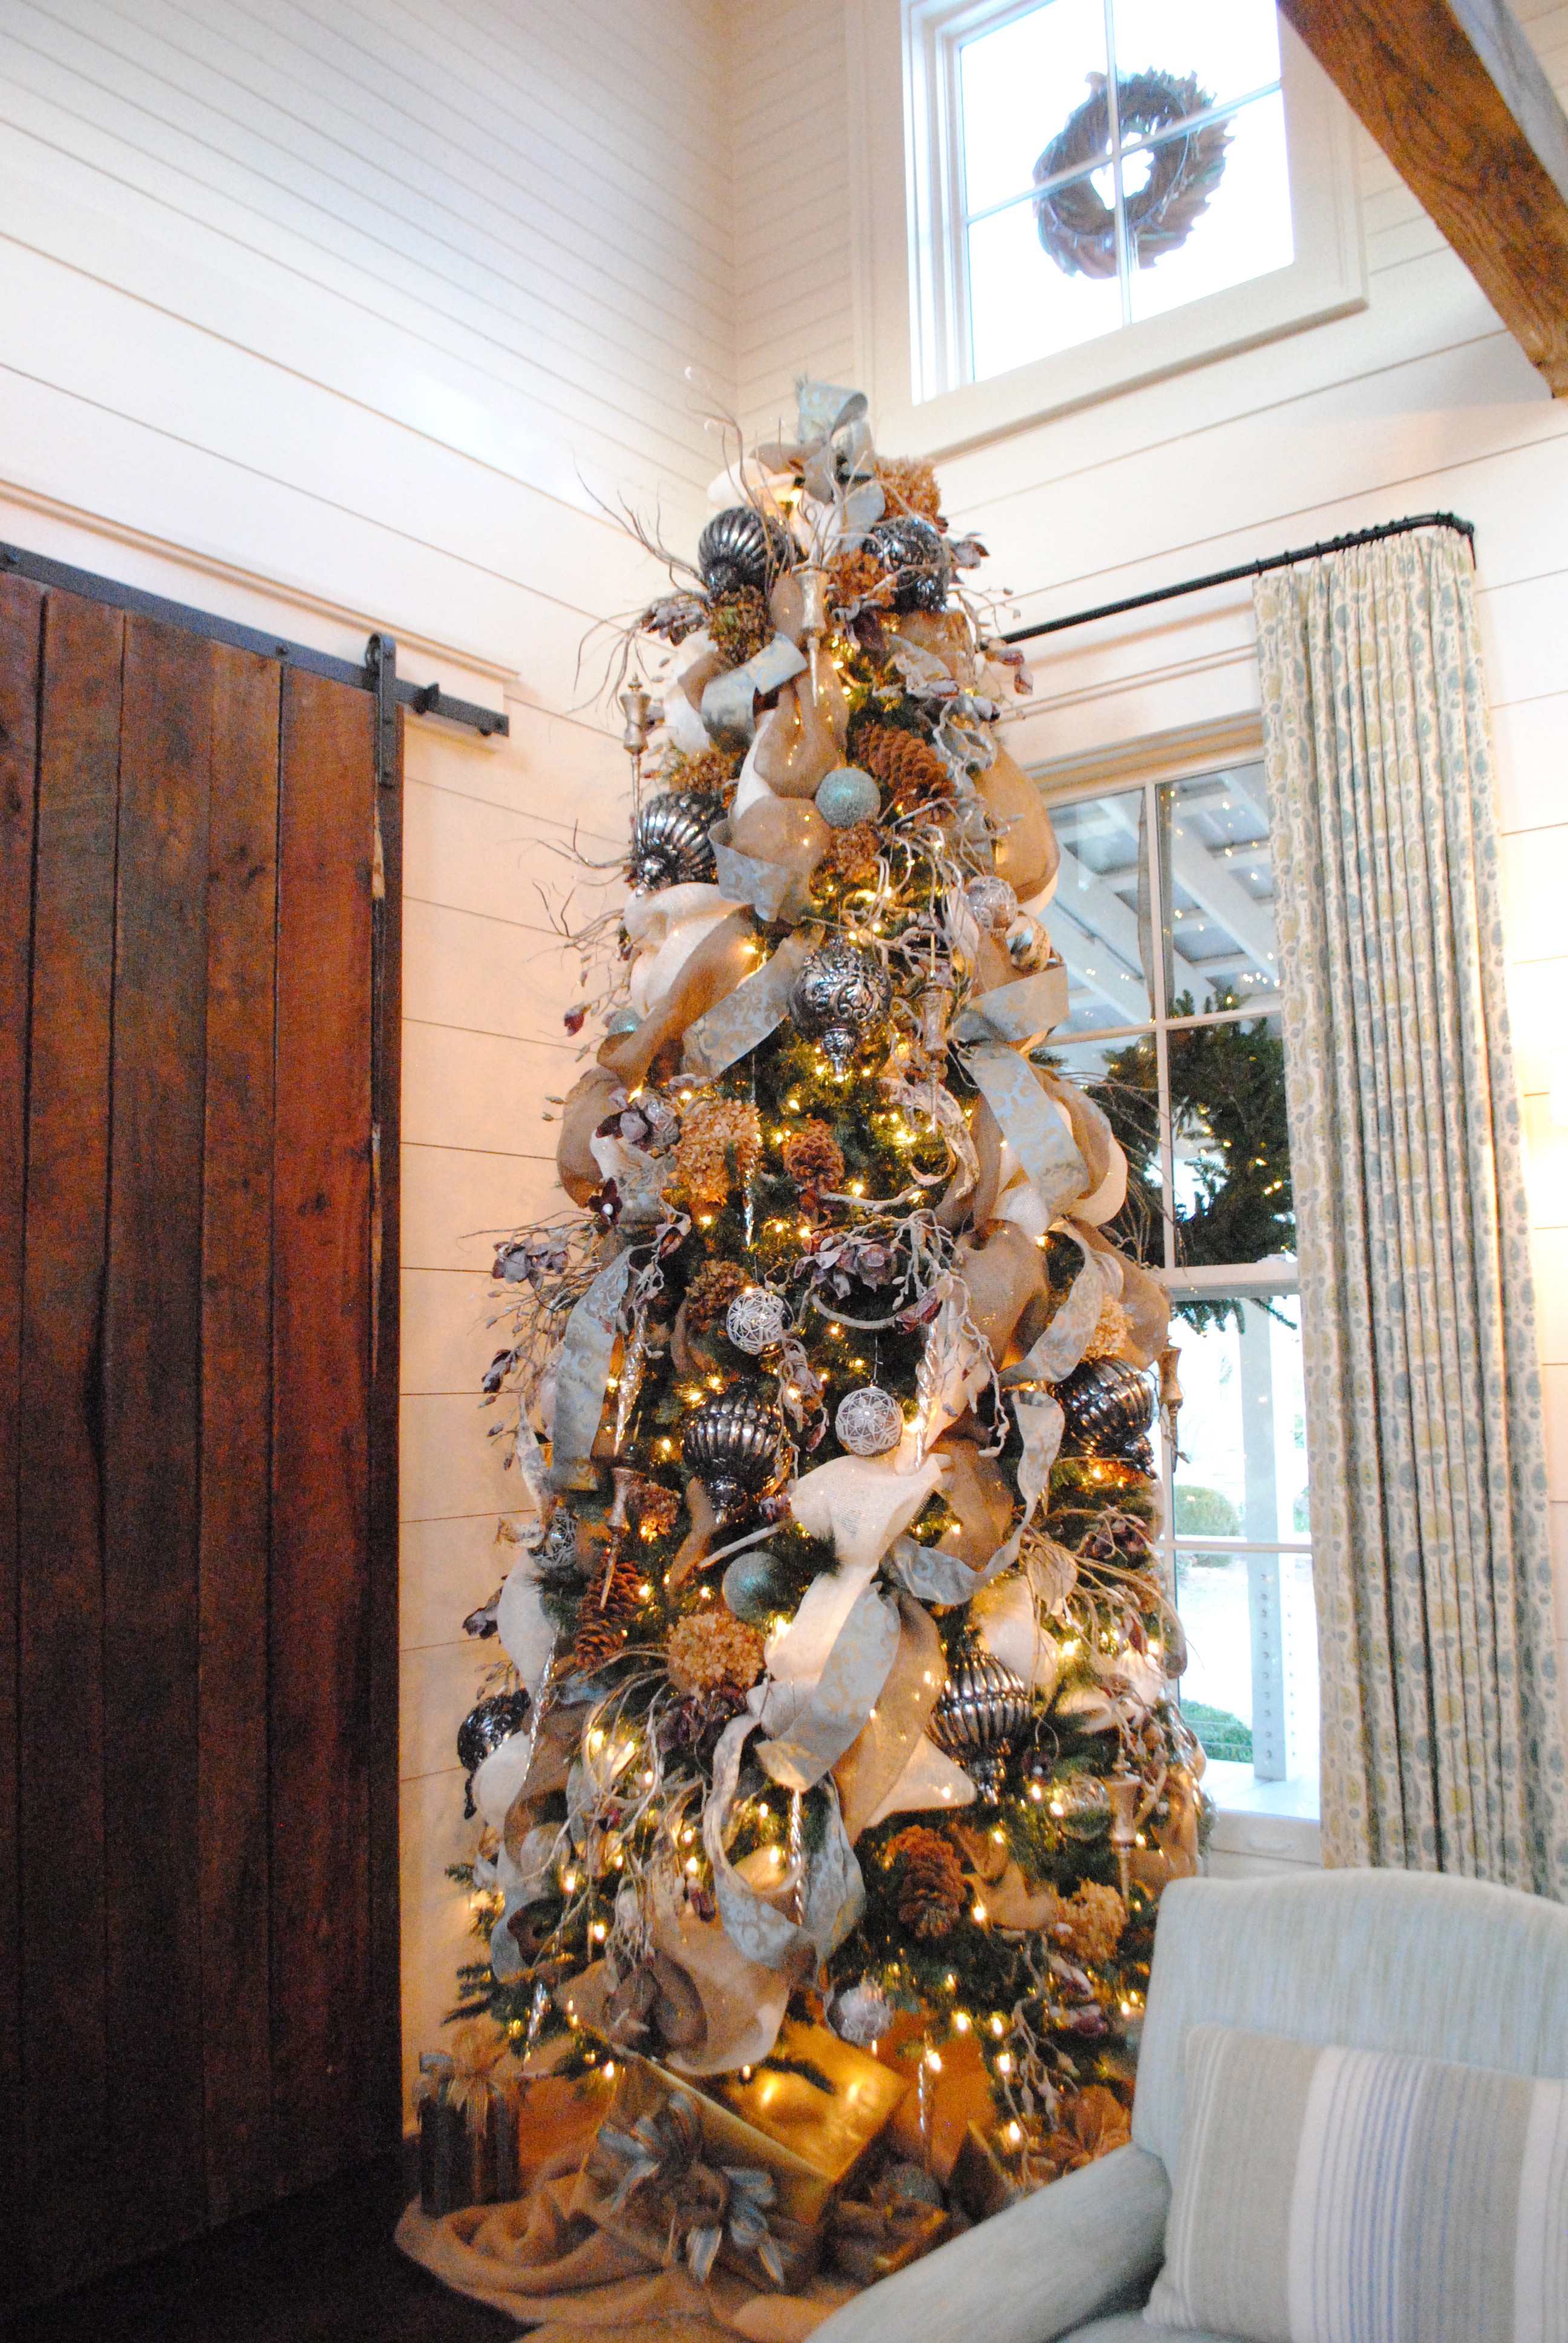 Fully decorated for Christmas, come see the Southern Living Idea House at Fontanel open for tour through Dec. 29, 2013